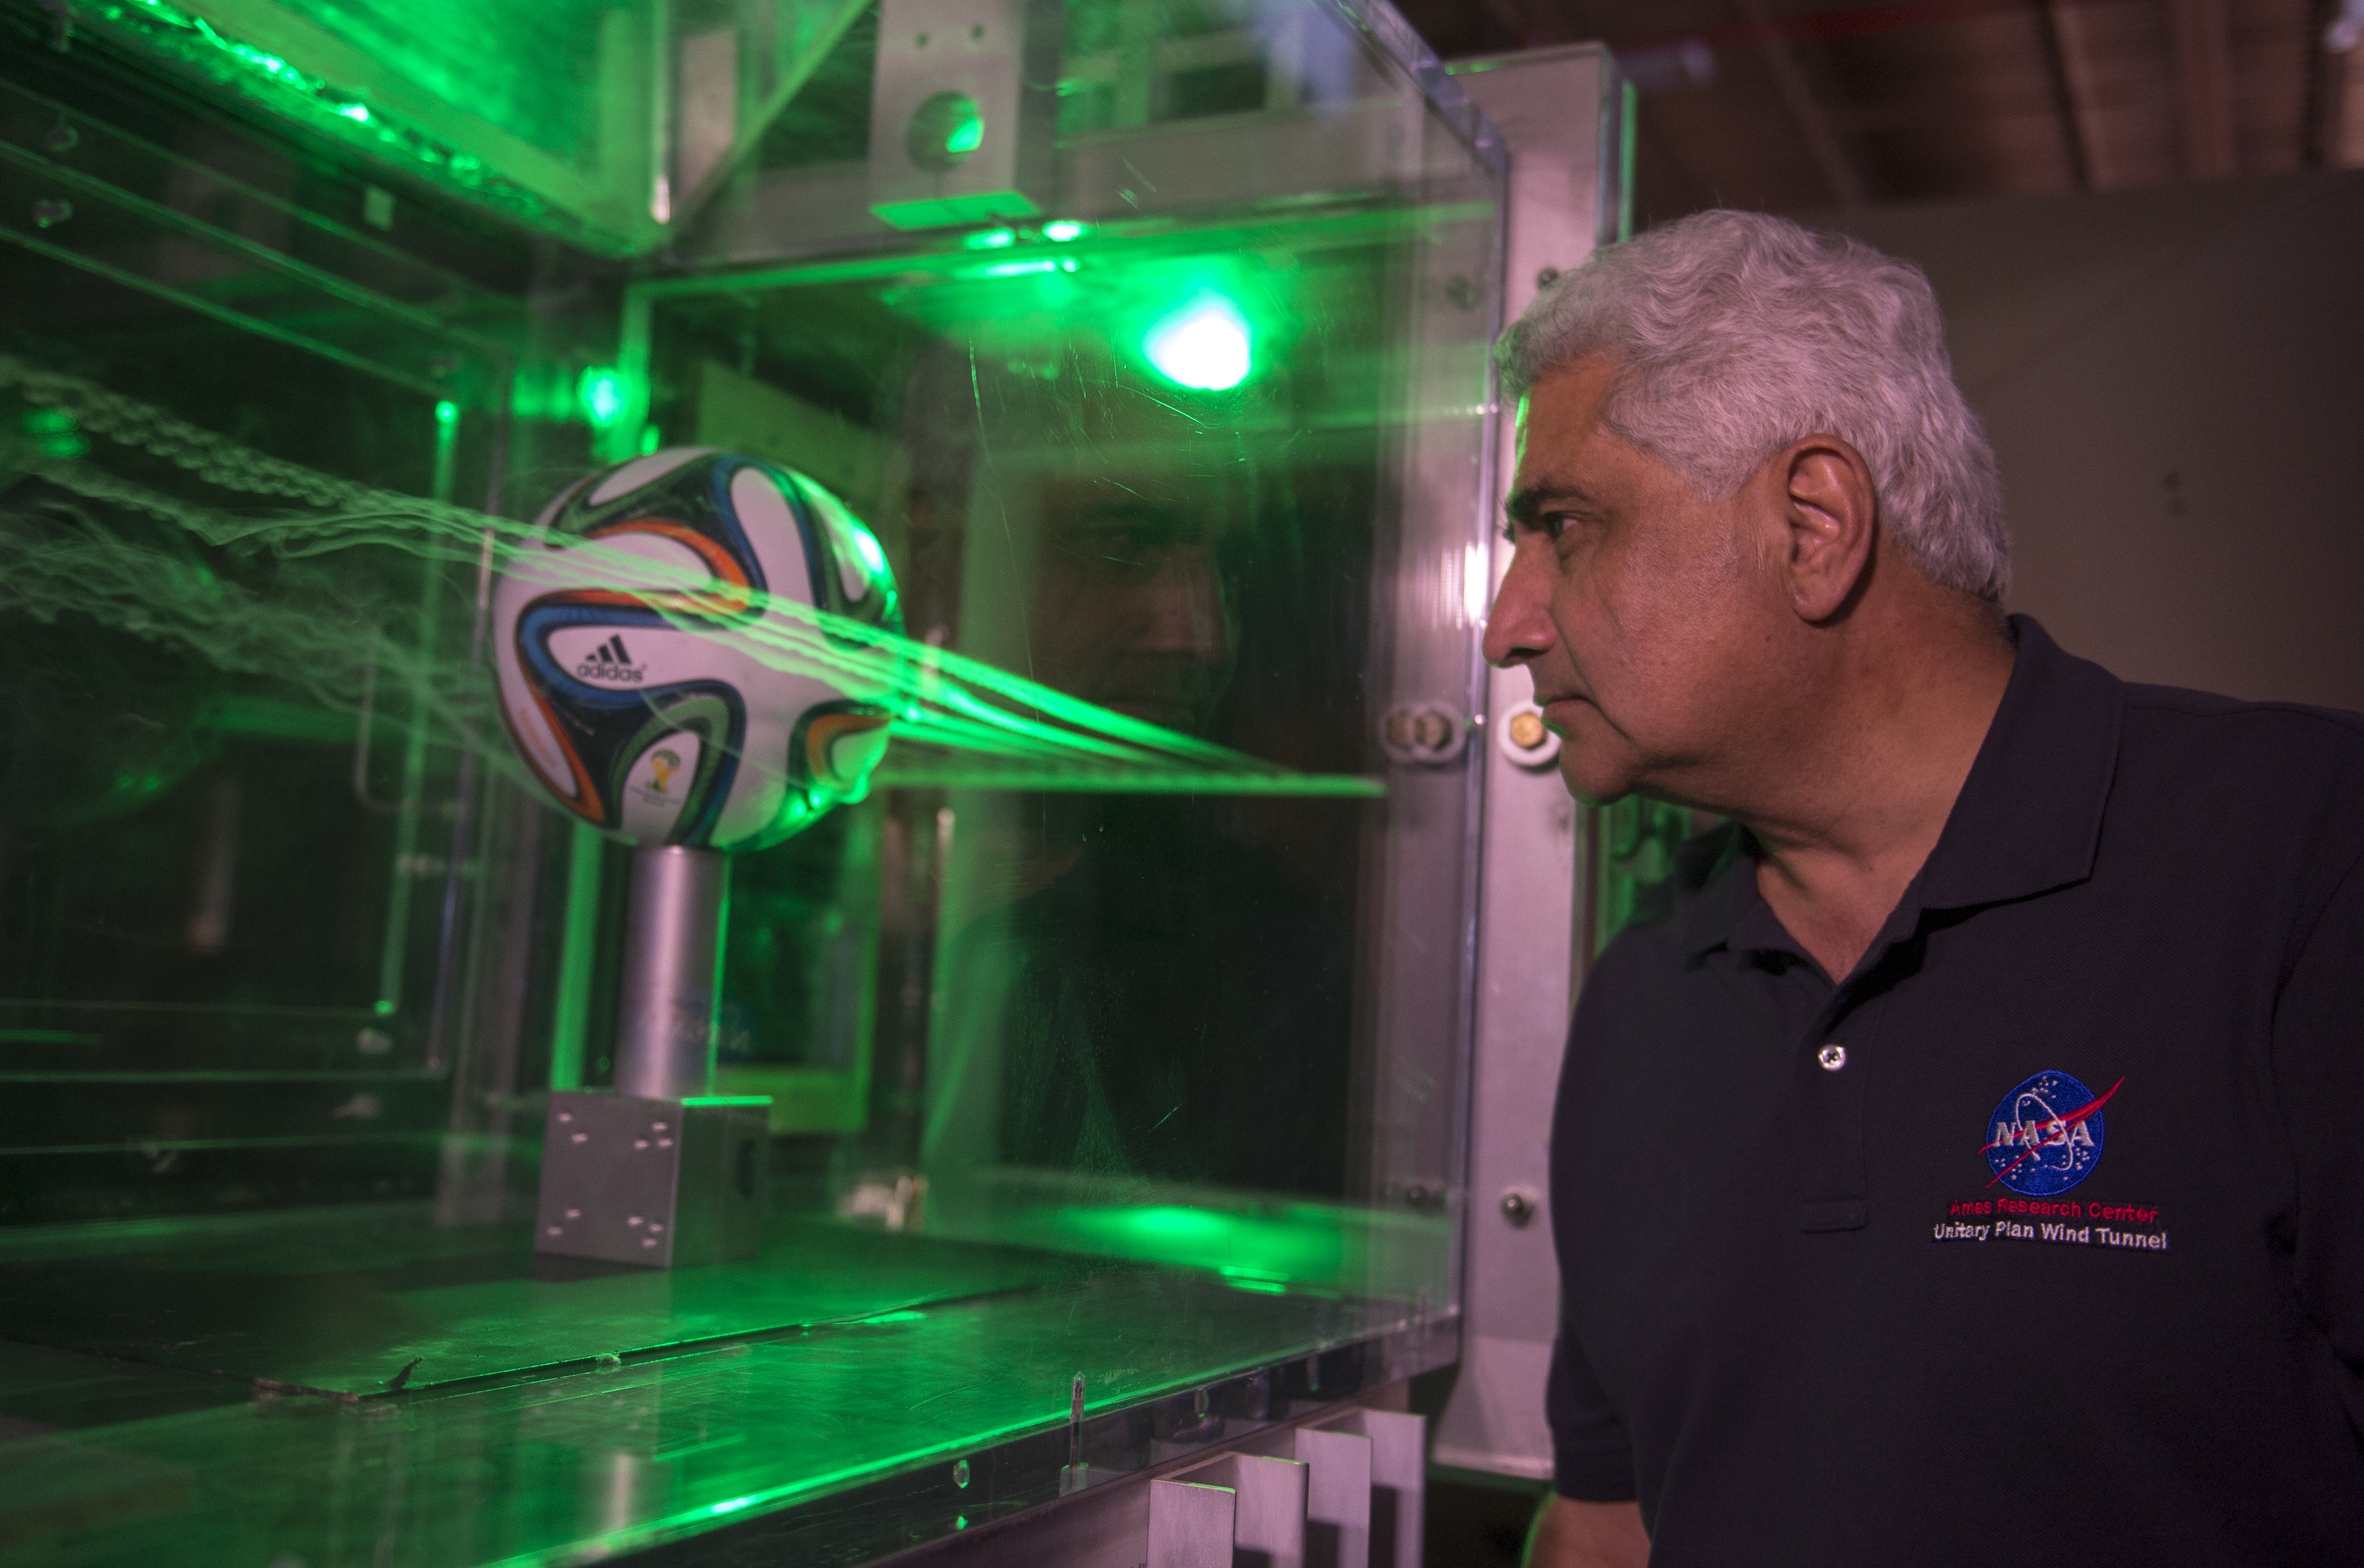 Physicists Say New World Cup Soccer Ball Design Has Big Impact